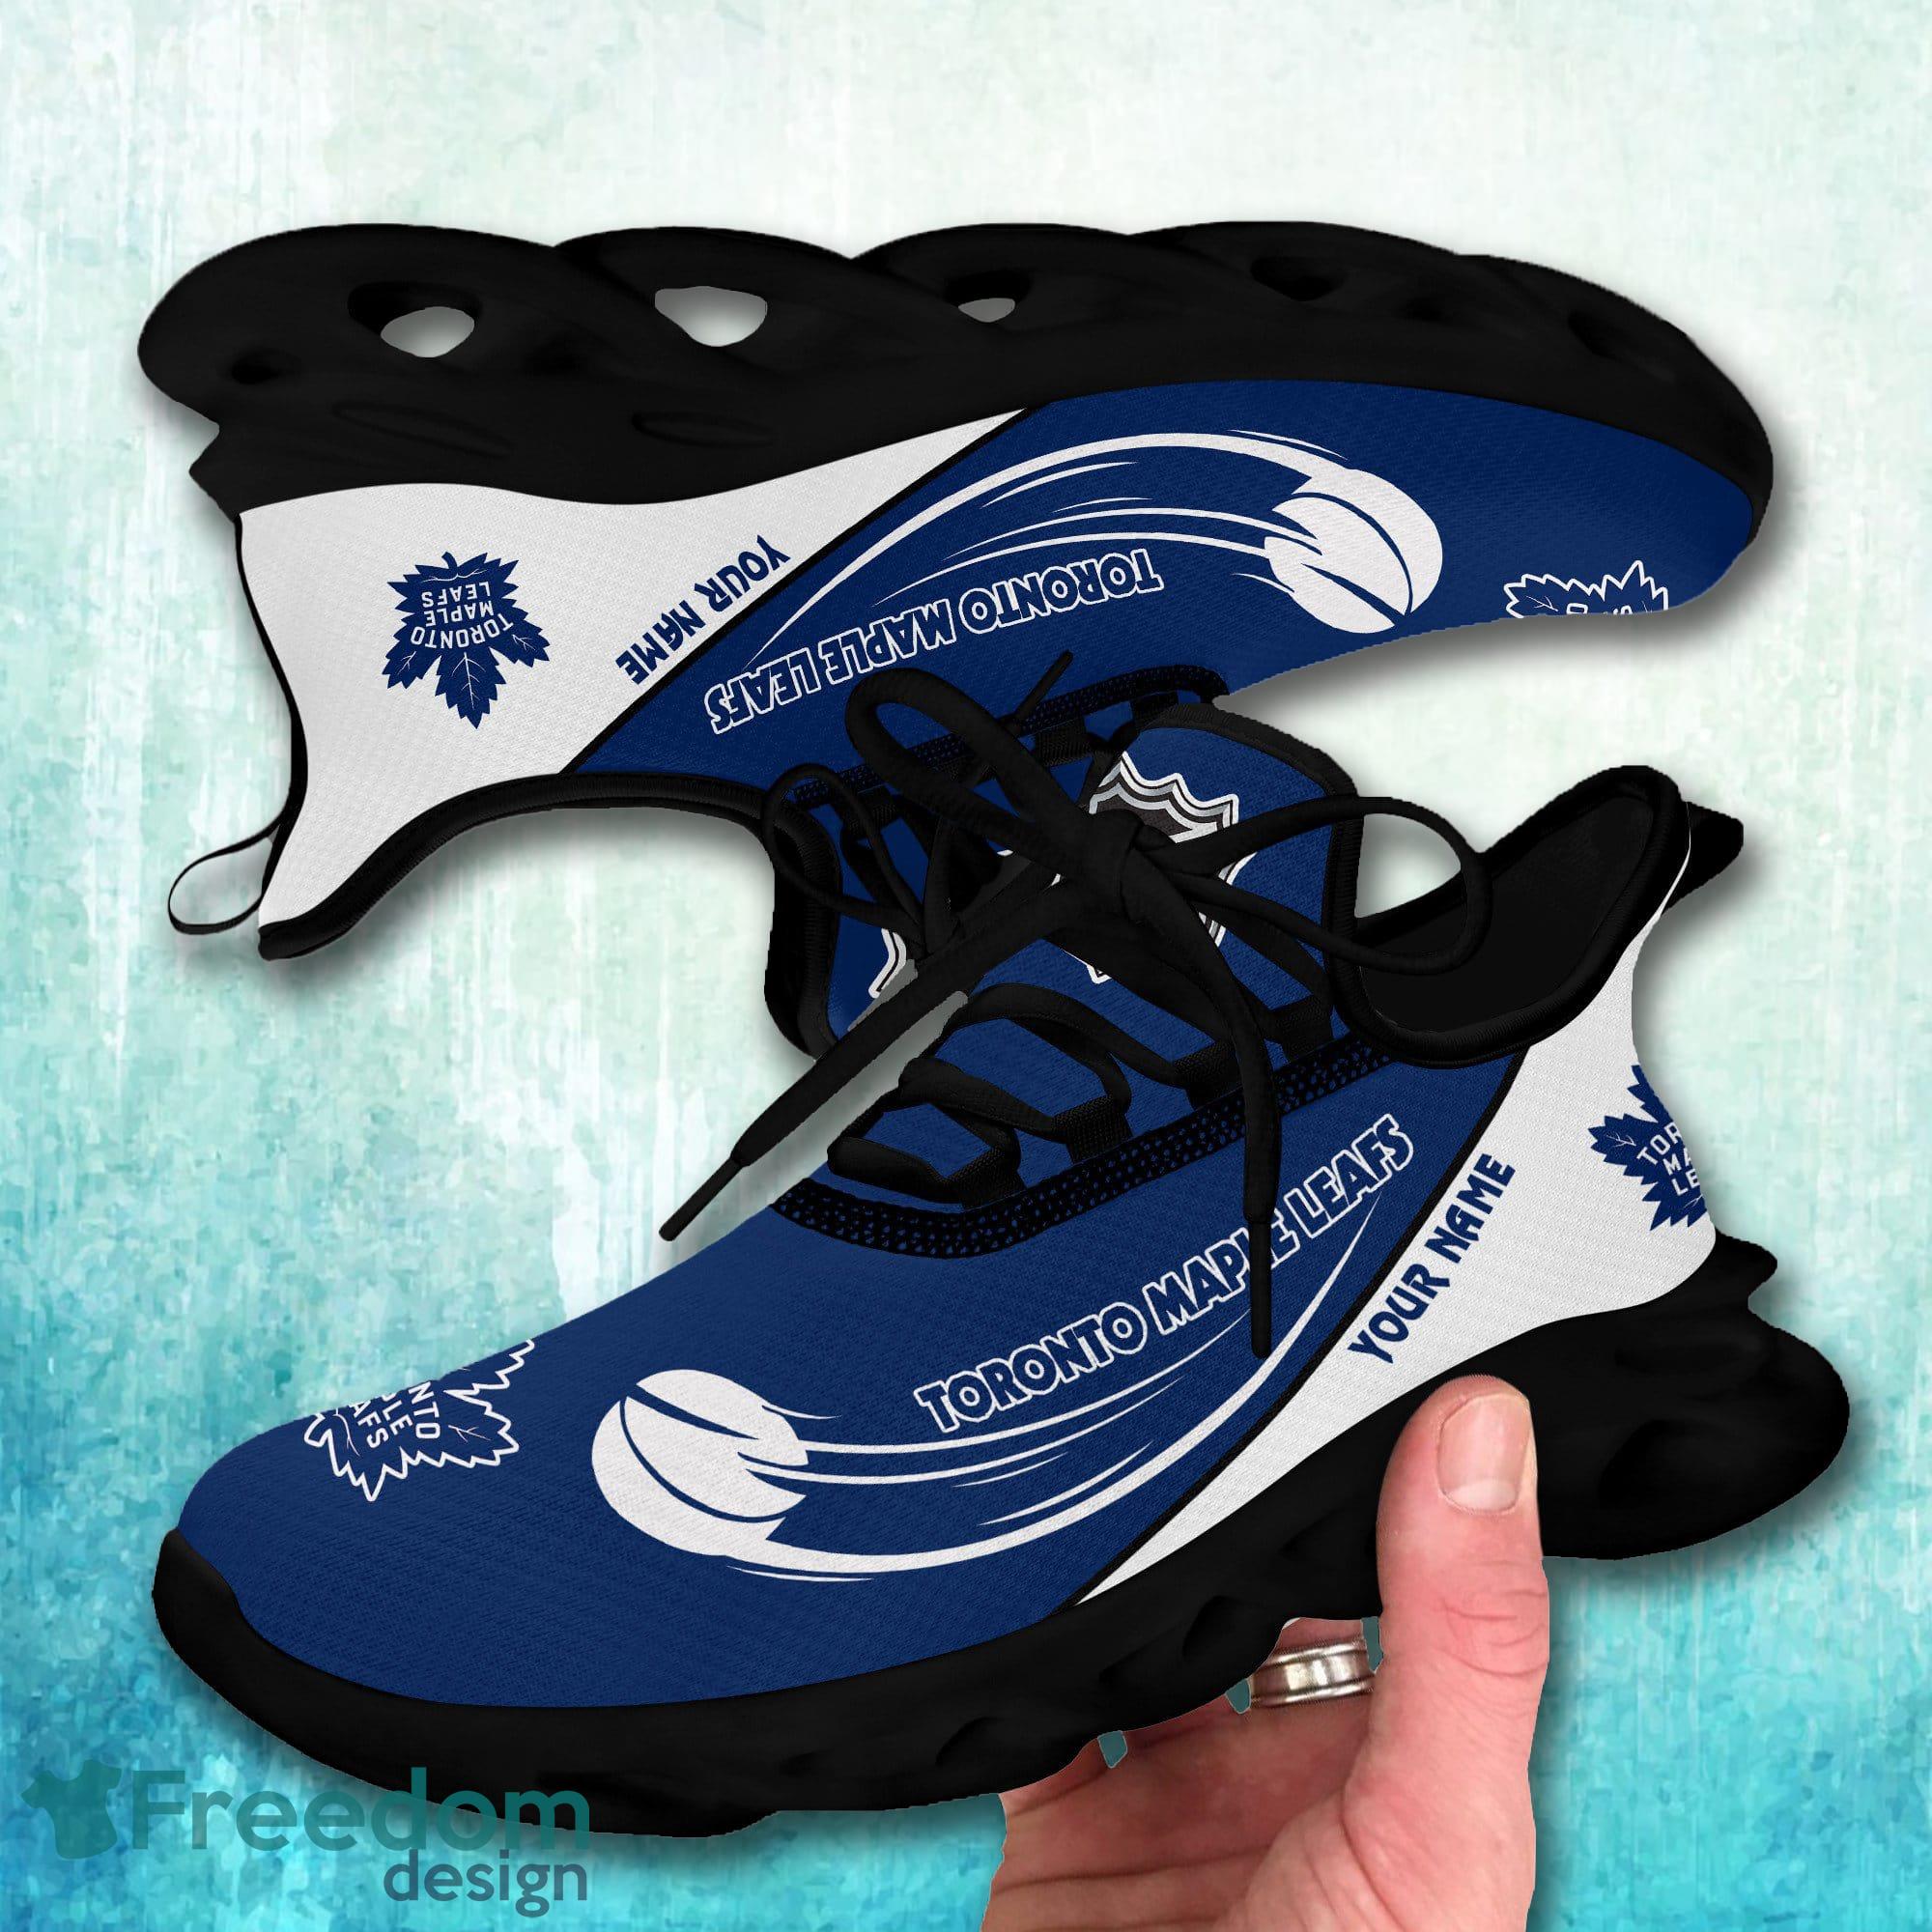 Colorado Avalanche Custom Name NHL New Luxury Max Soul Shoes Gift For Fans  Running Sneaker - Banantees